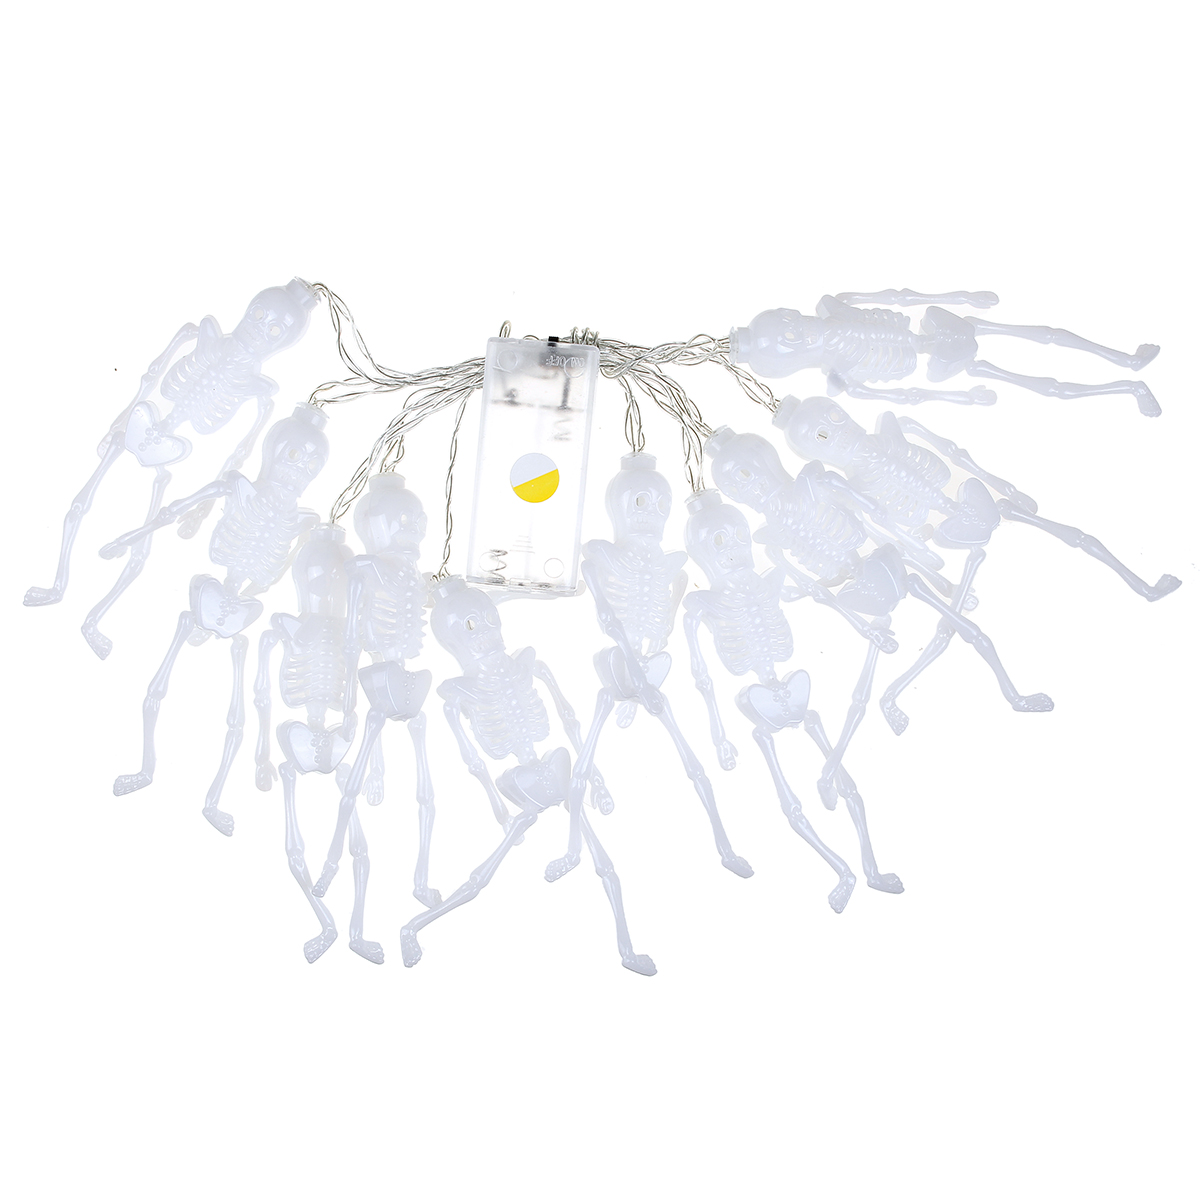 Specter-Skeleton-Ghost-Eyes-Pattern-Halloween-LED-String-Light-Holiday-Funny-Party-Outdoor-Indoor-De-1567228-8